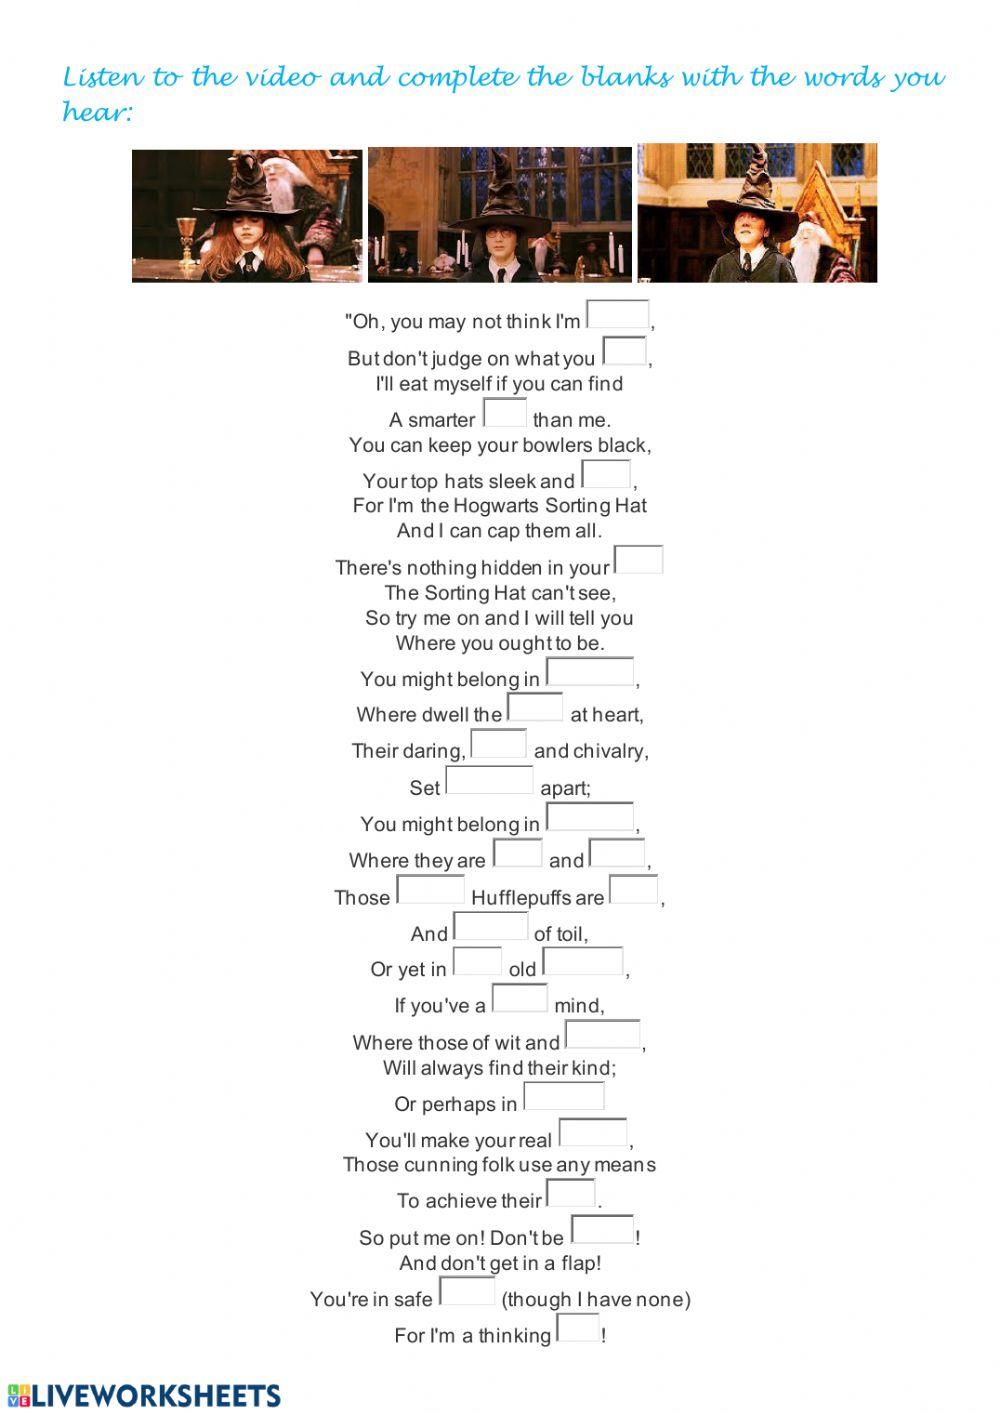 The Sorting Hat's Song